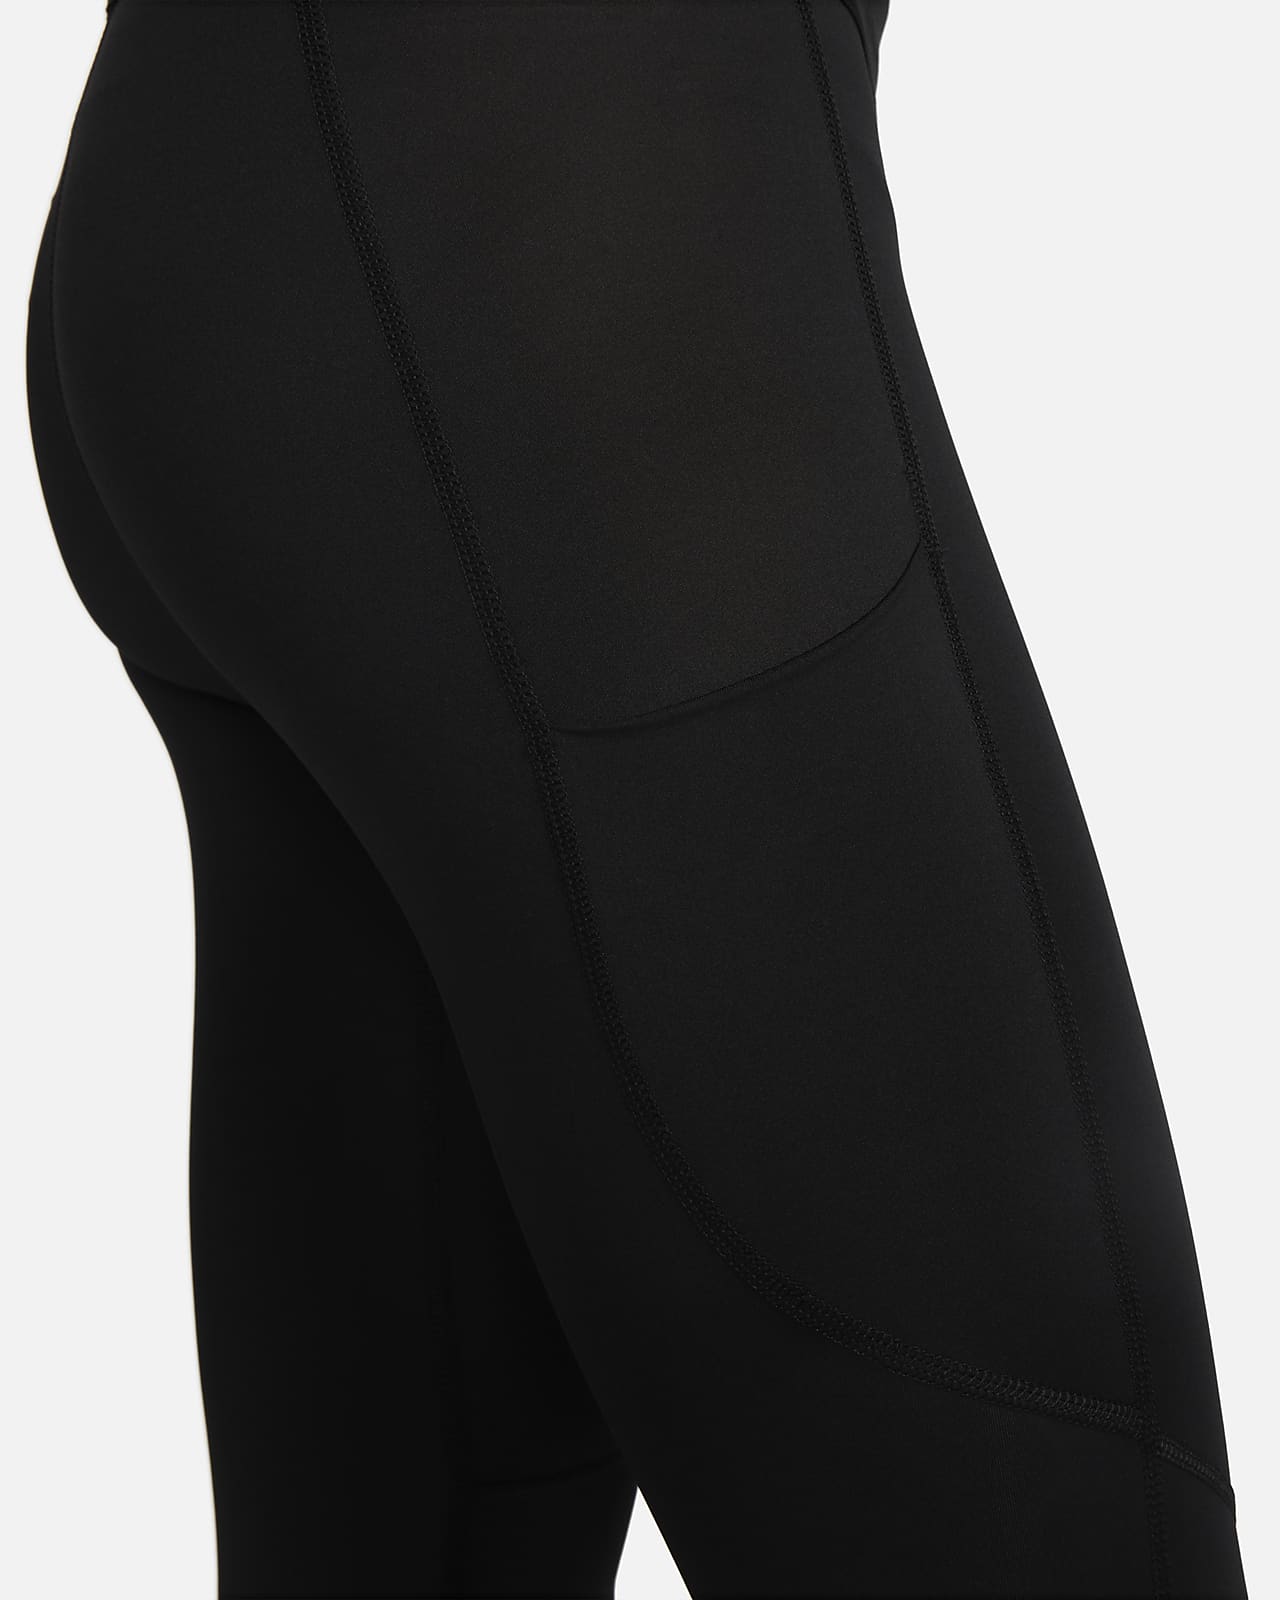 Black tight / leggins in size S from PROZIS, Men's Fashion, Activewear on  Carousell